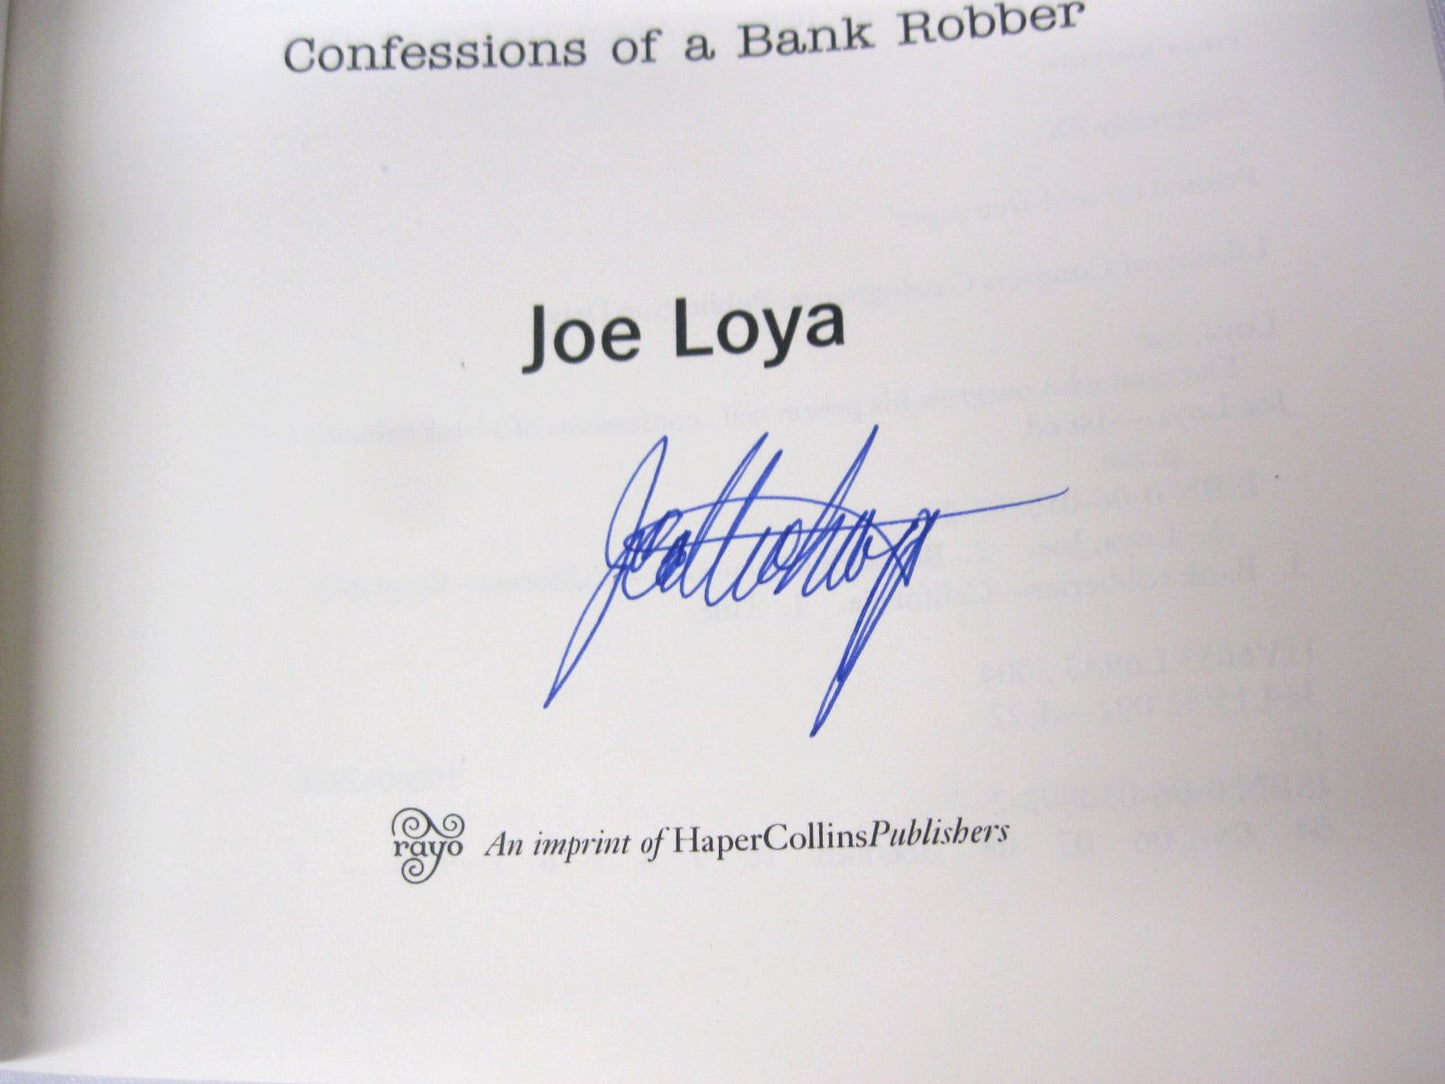 The Man Who Outgrew His Prison Cell: Confessions of a Bank Robber by Joe Loya